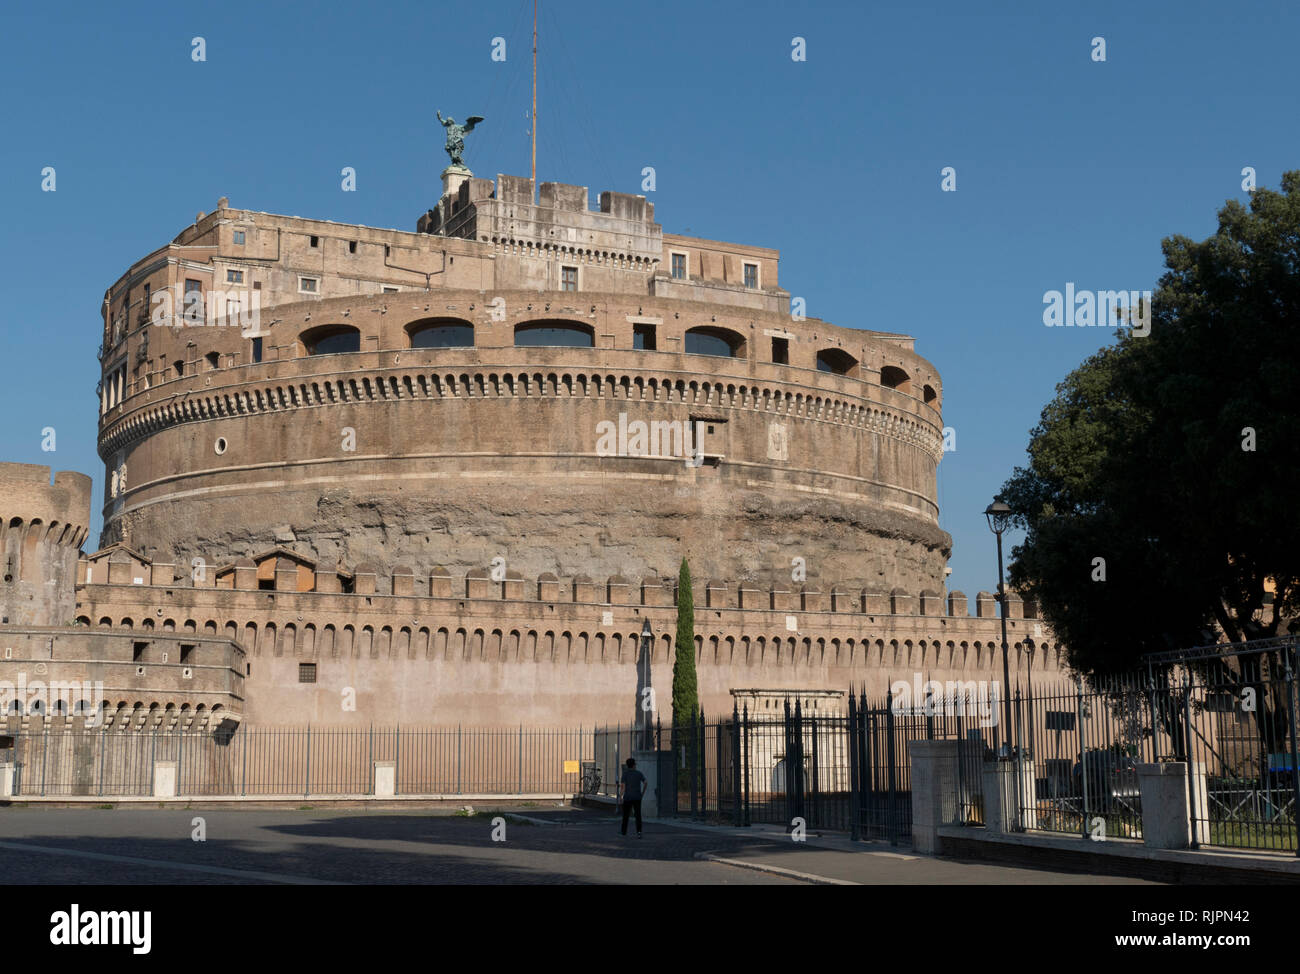 Mausoleum of Hadrian, Castel Sant'Angelo, Castle of the Holy Angel, a towering cylindrical building in Parco Adriano, Rome, Italy Stock Photo